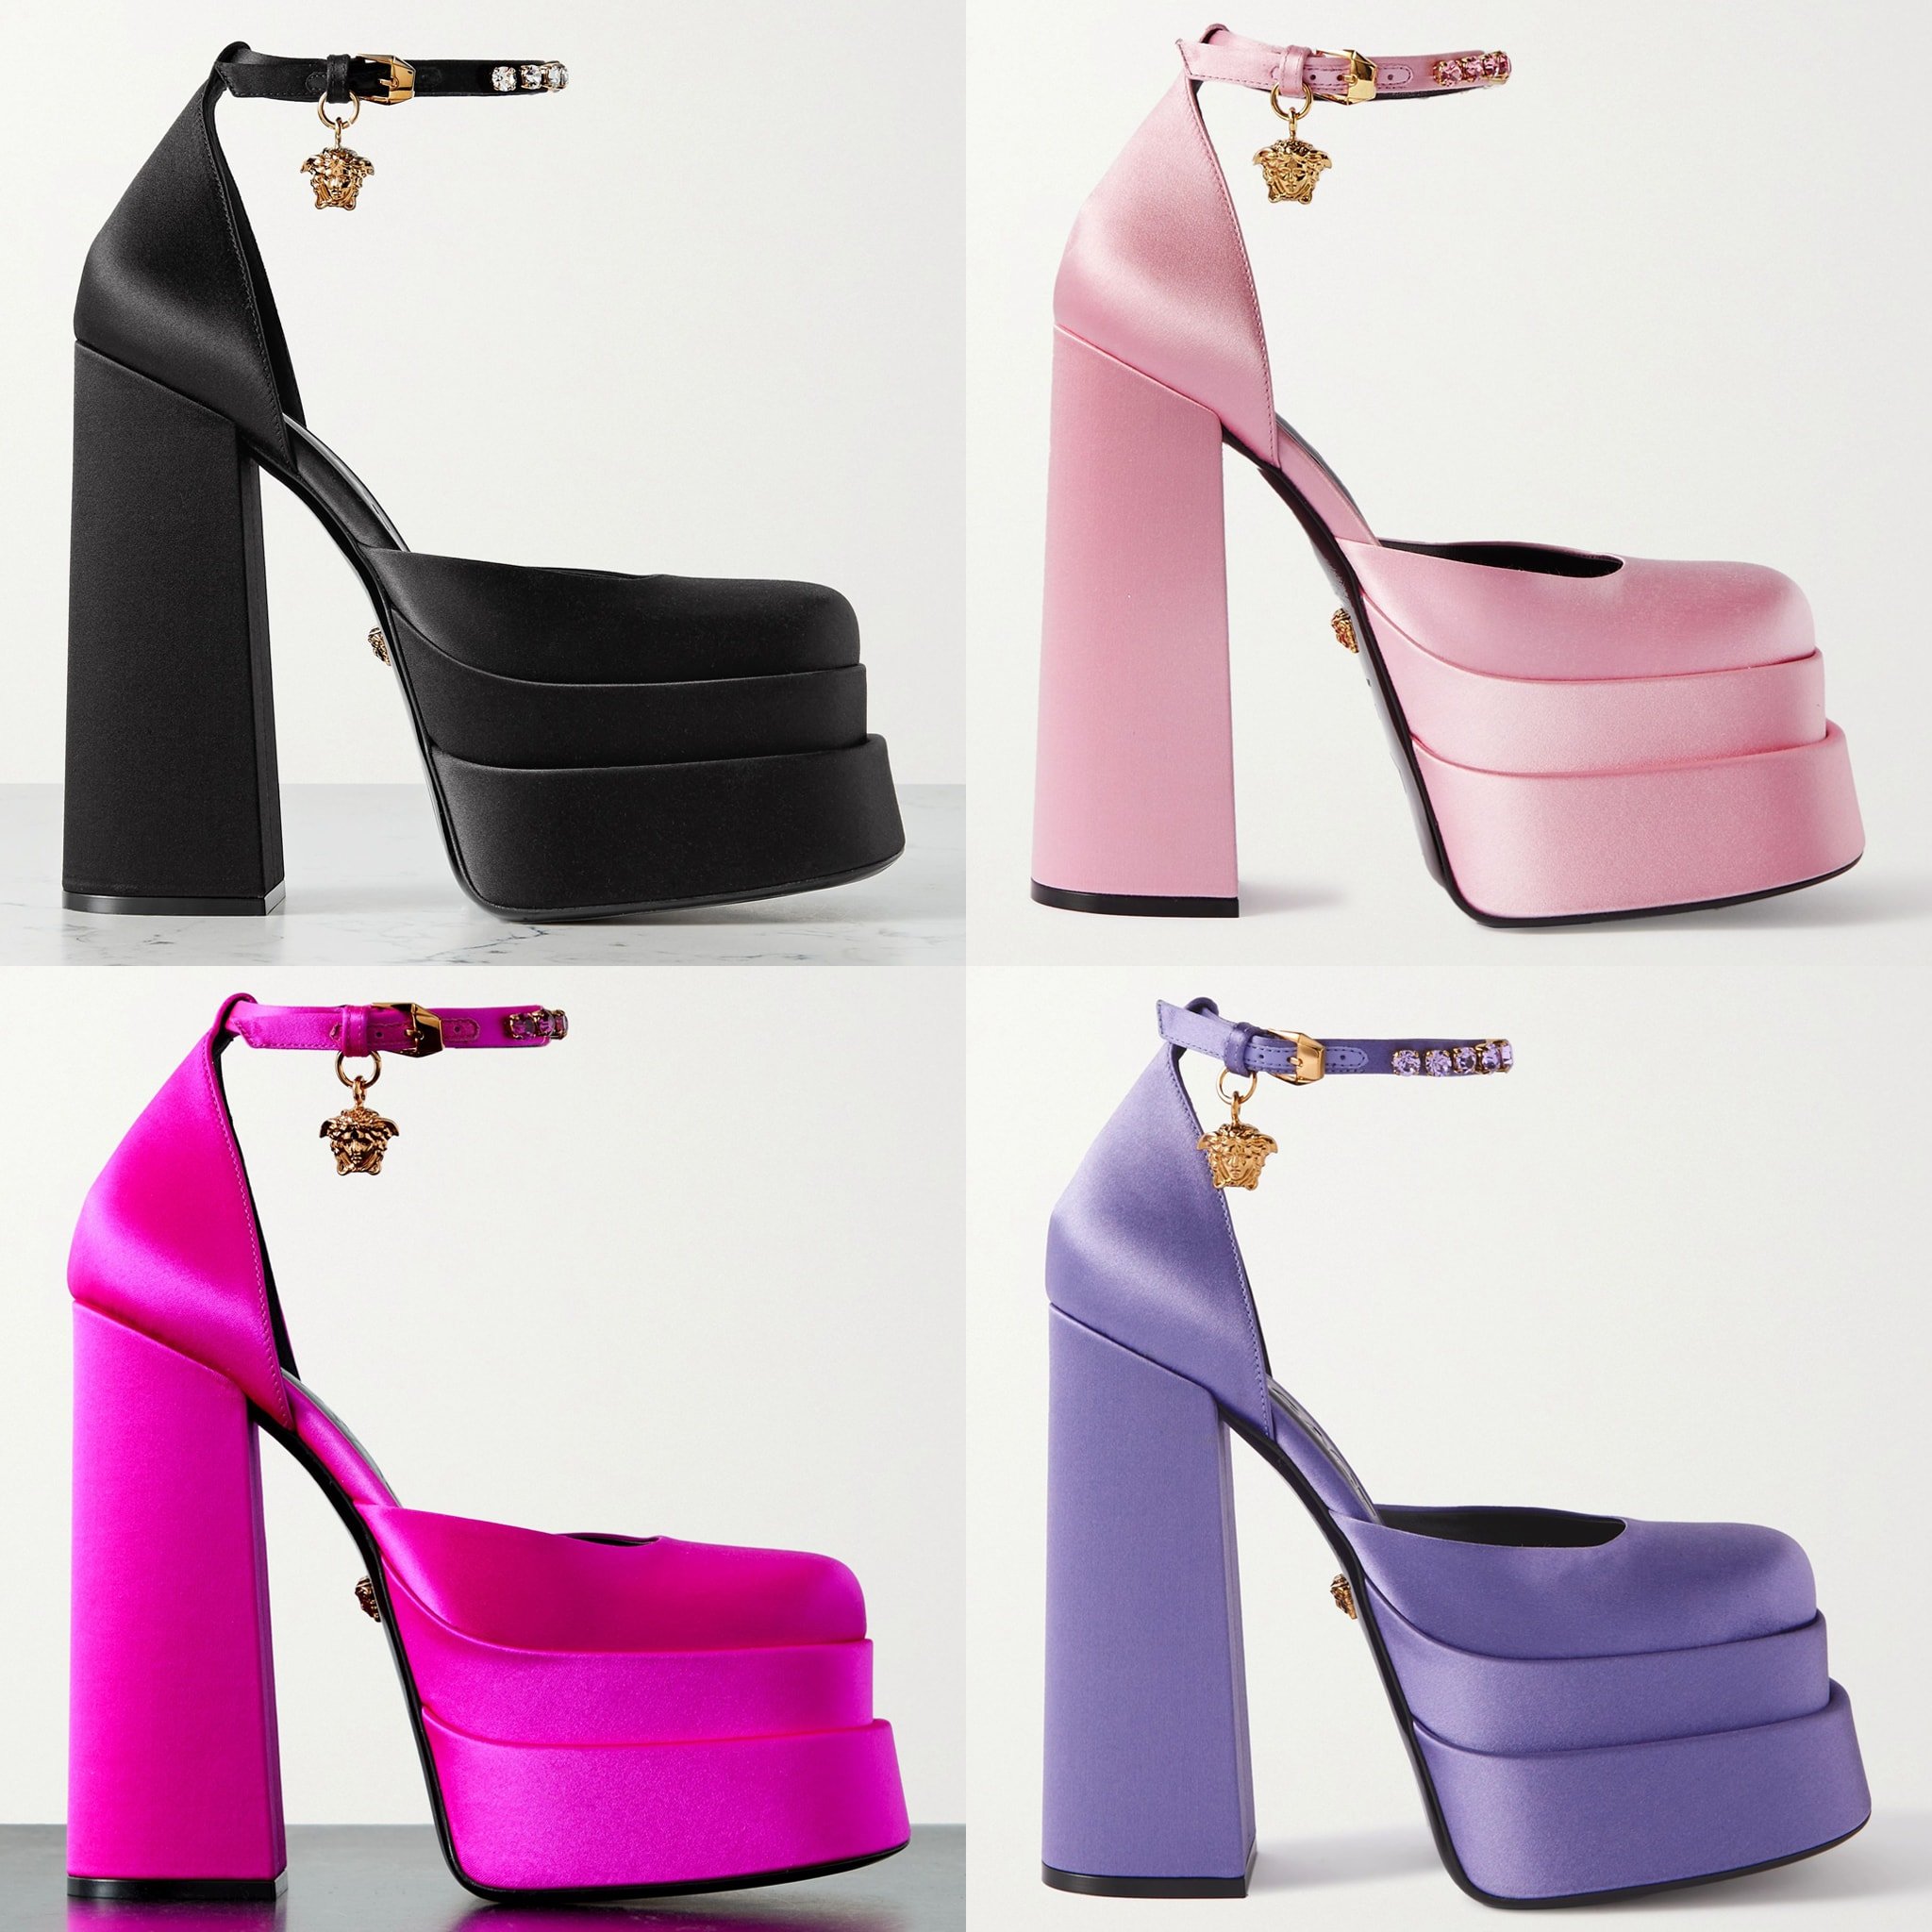 Not only are the Medusa Aevitas chic, but they also add height with stacked platforms and 6-inch towering block heels